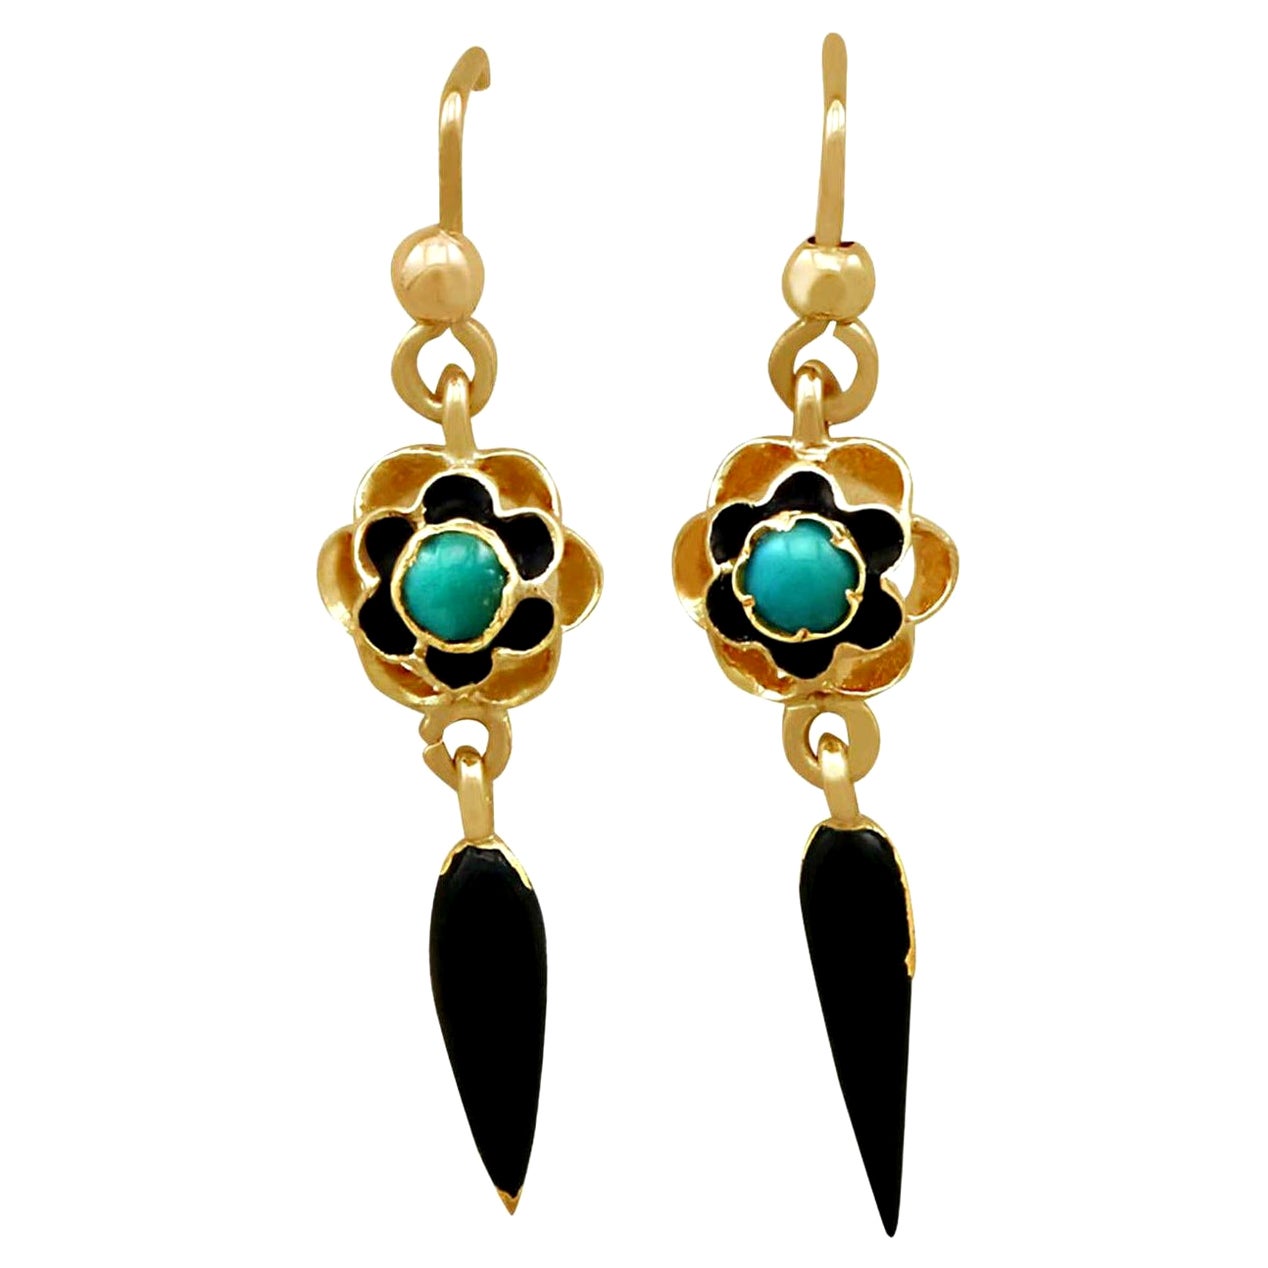 Victorian 1890s Turquoise and Enamel Yellow Gold Earrings